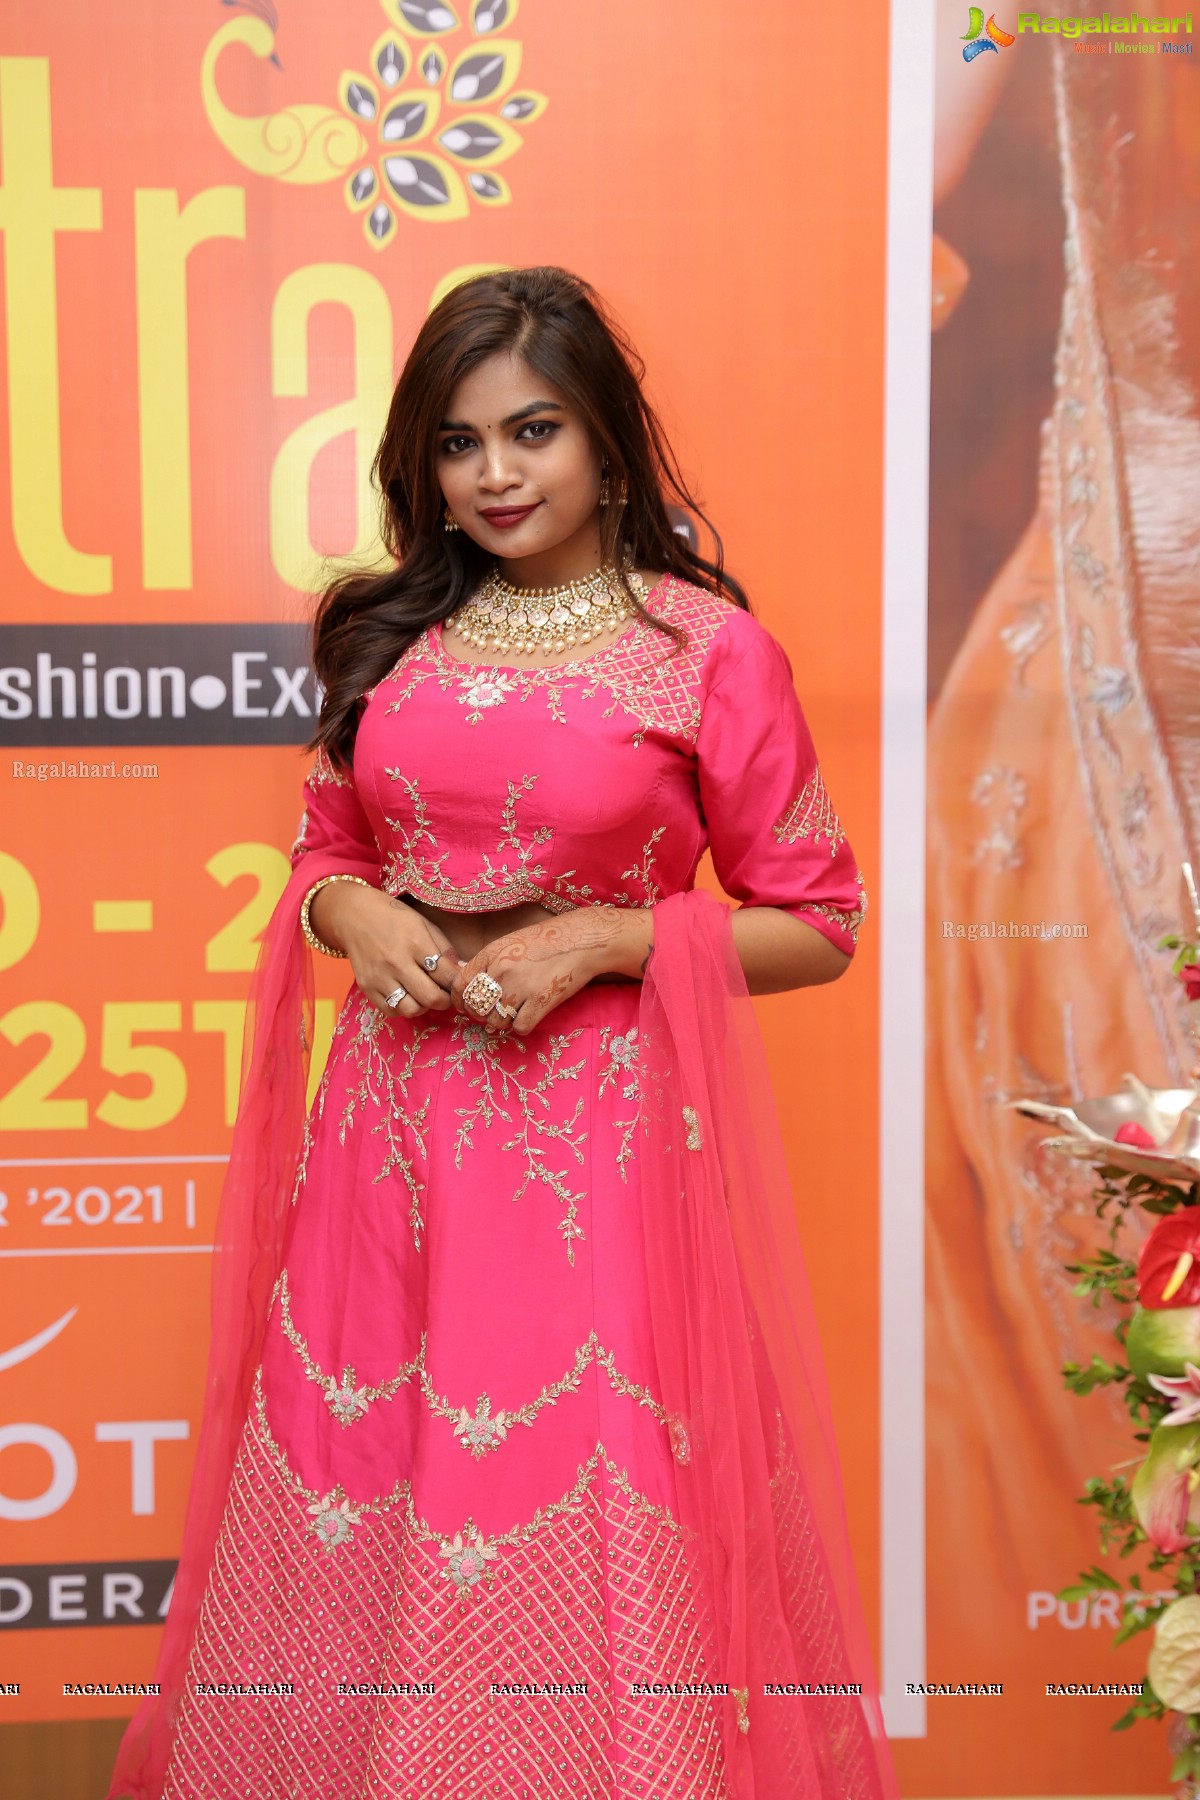 Sutraa Fashion and Lifestyle Exhibition 'Wedding Edit' December 2021 Begins at HICC-Novotel